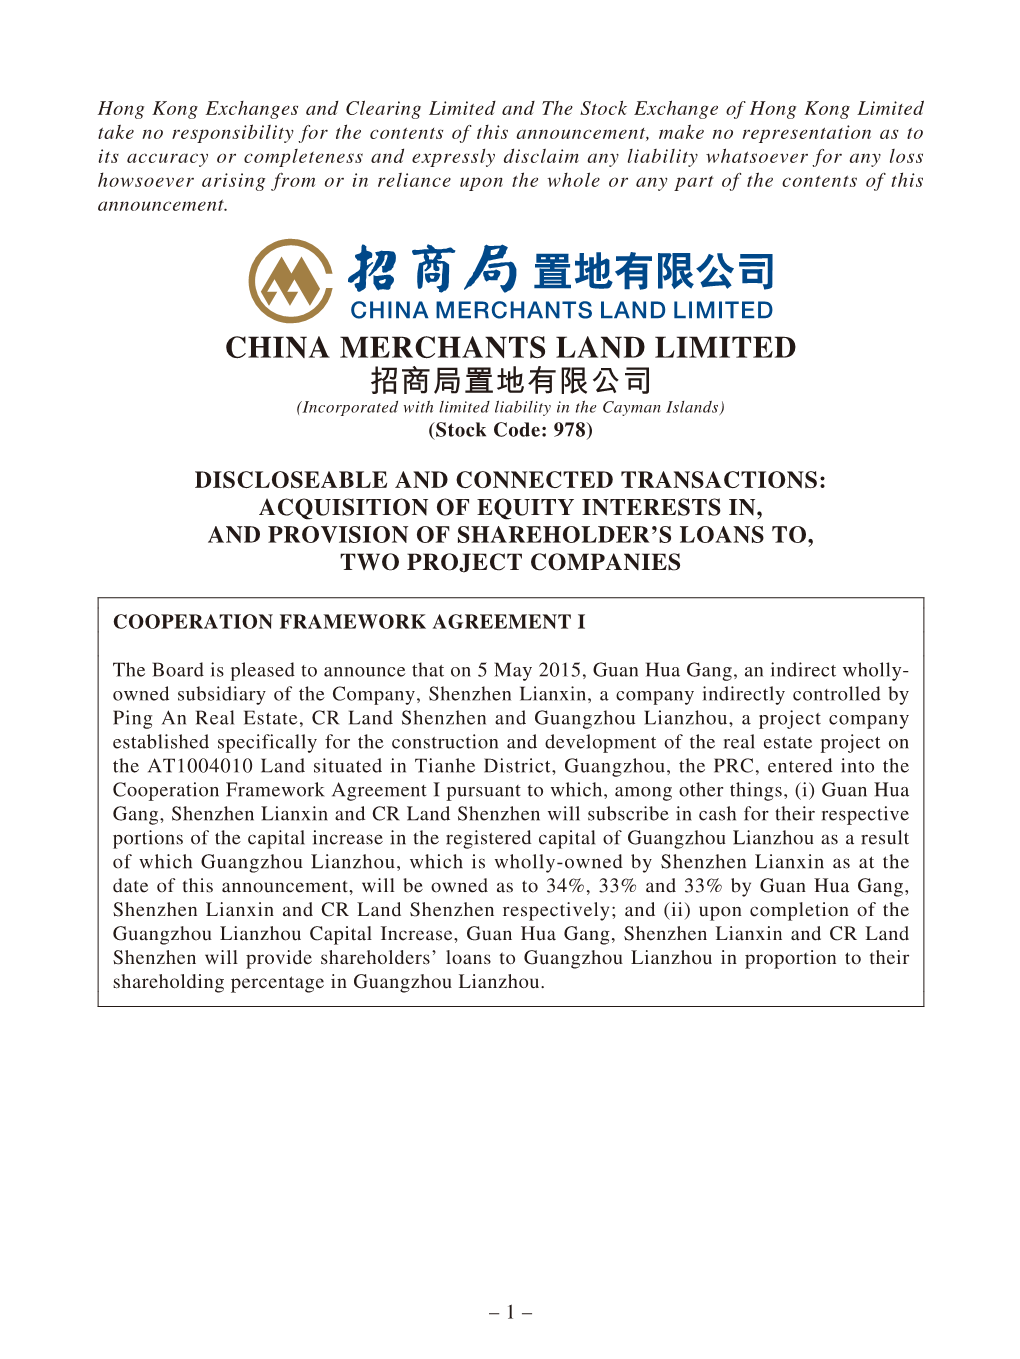 CHINA MERCHANTS LAND LIMITED 招商局置地有限公司 (Incorporated with Limited Liability in the Cayman Islands) (Stock Code: 978)